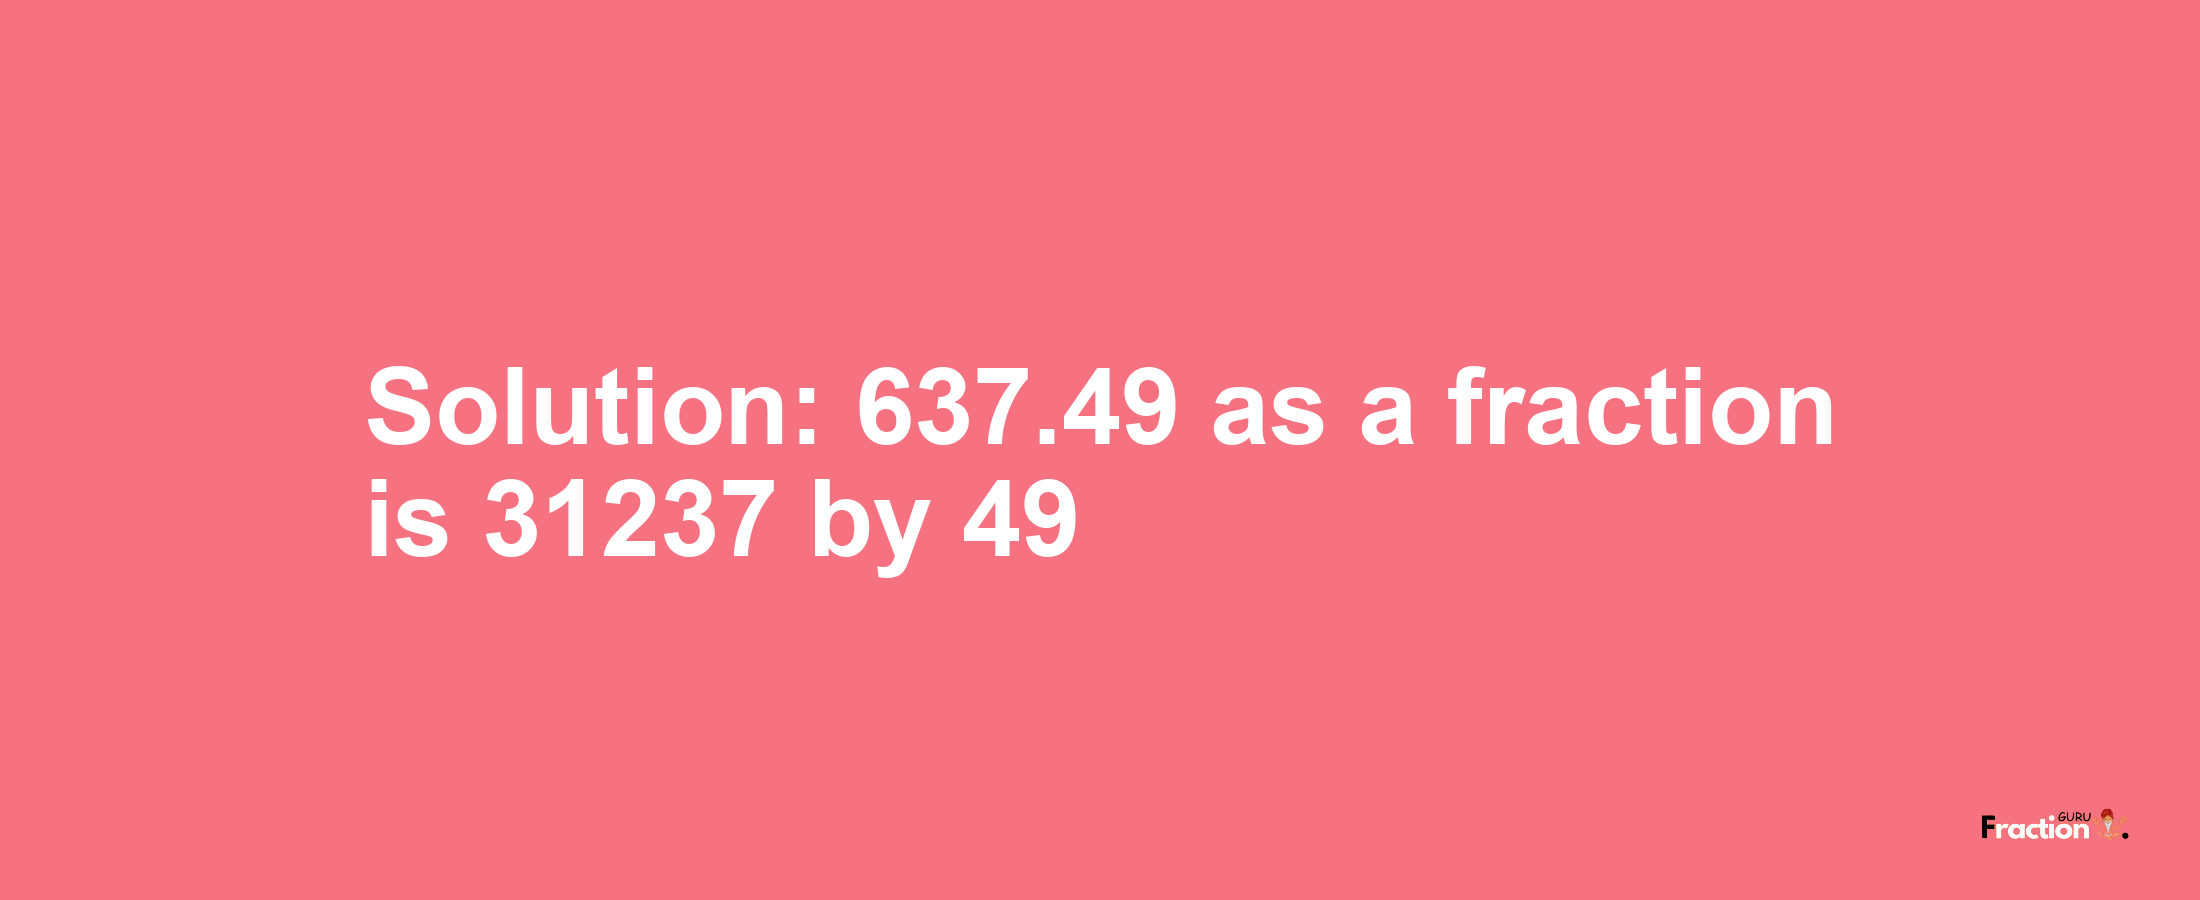 Solution:637.49 as a fraction is 31237/49